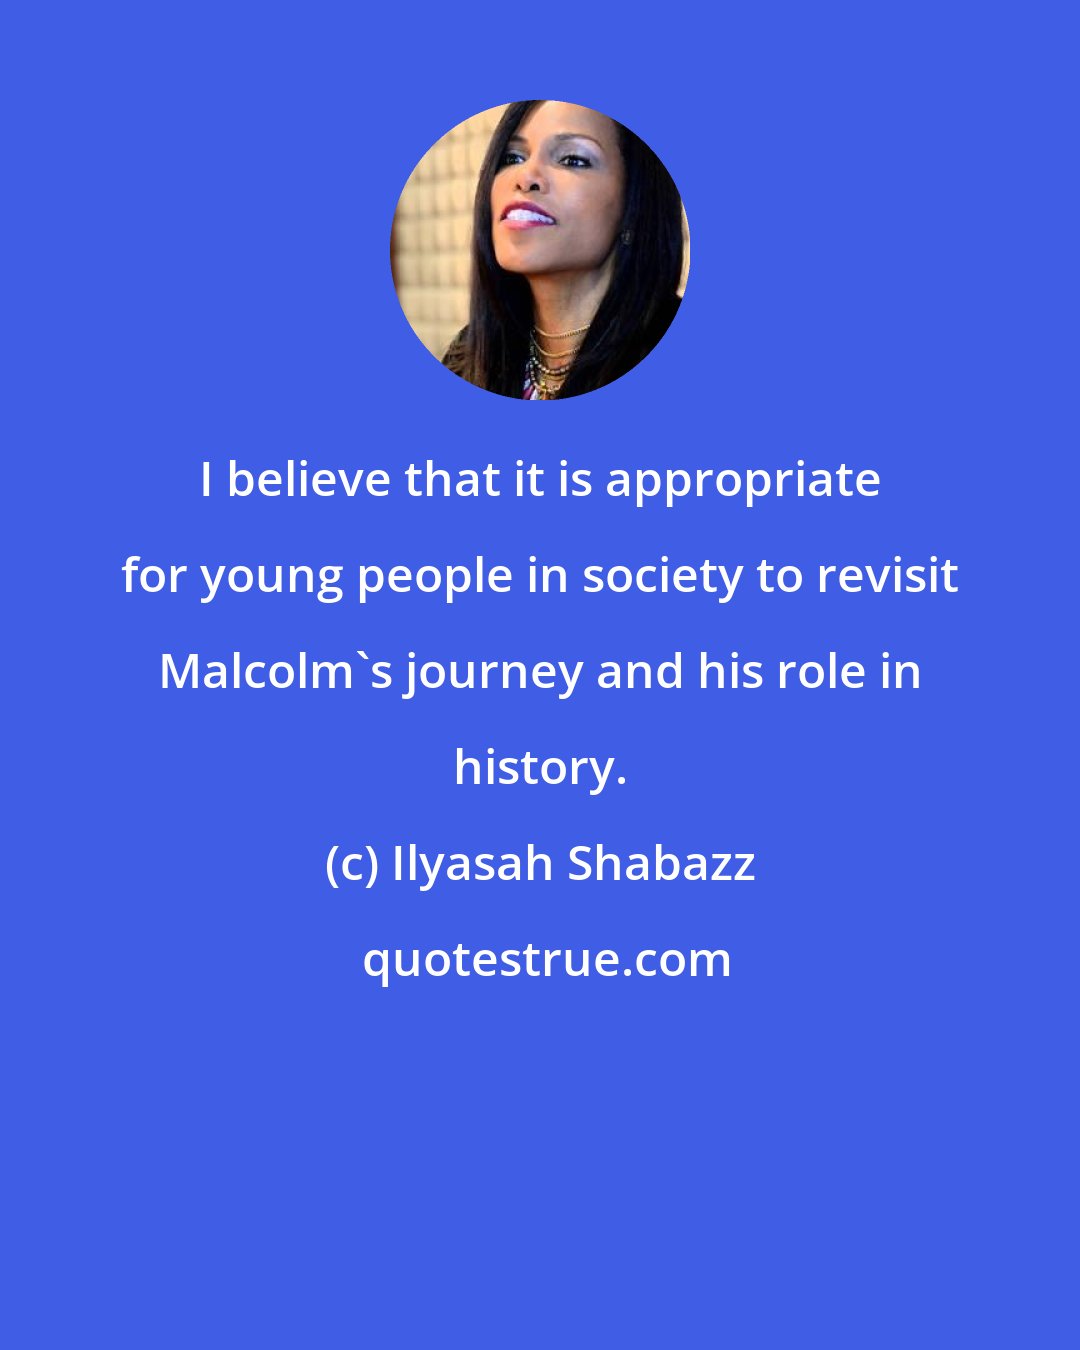 Ilyasah Shabazz: I believe that it is appropriate for young people in society to revisit Malcolm's journey and his role in history.